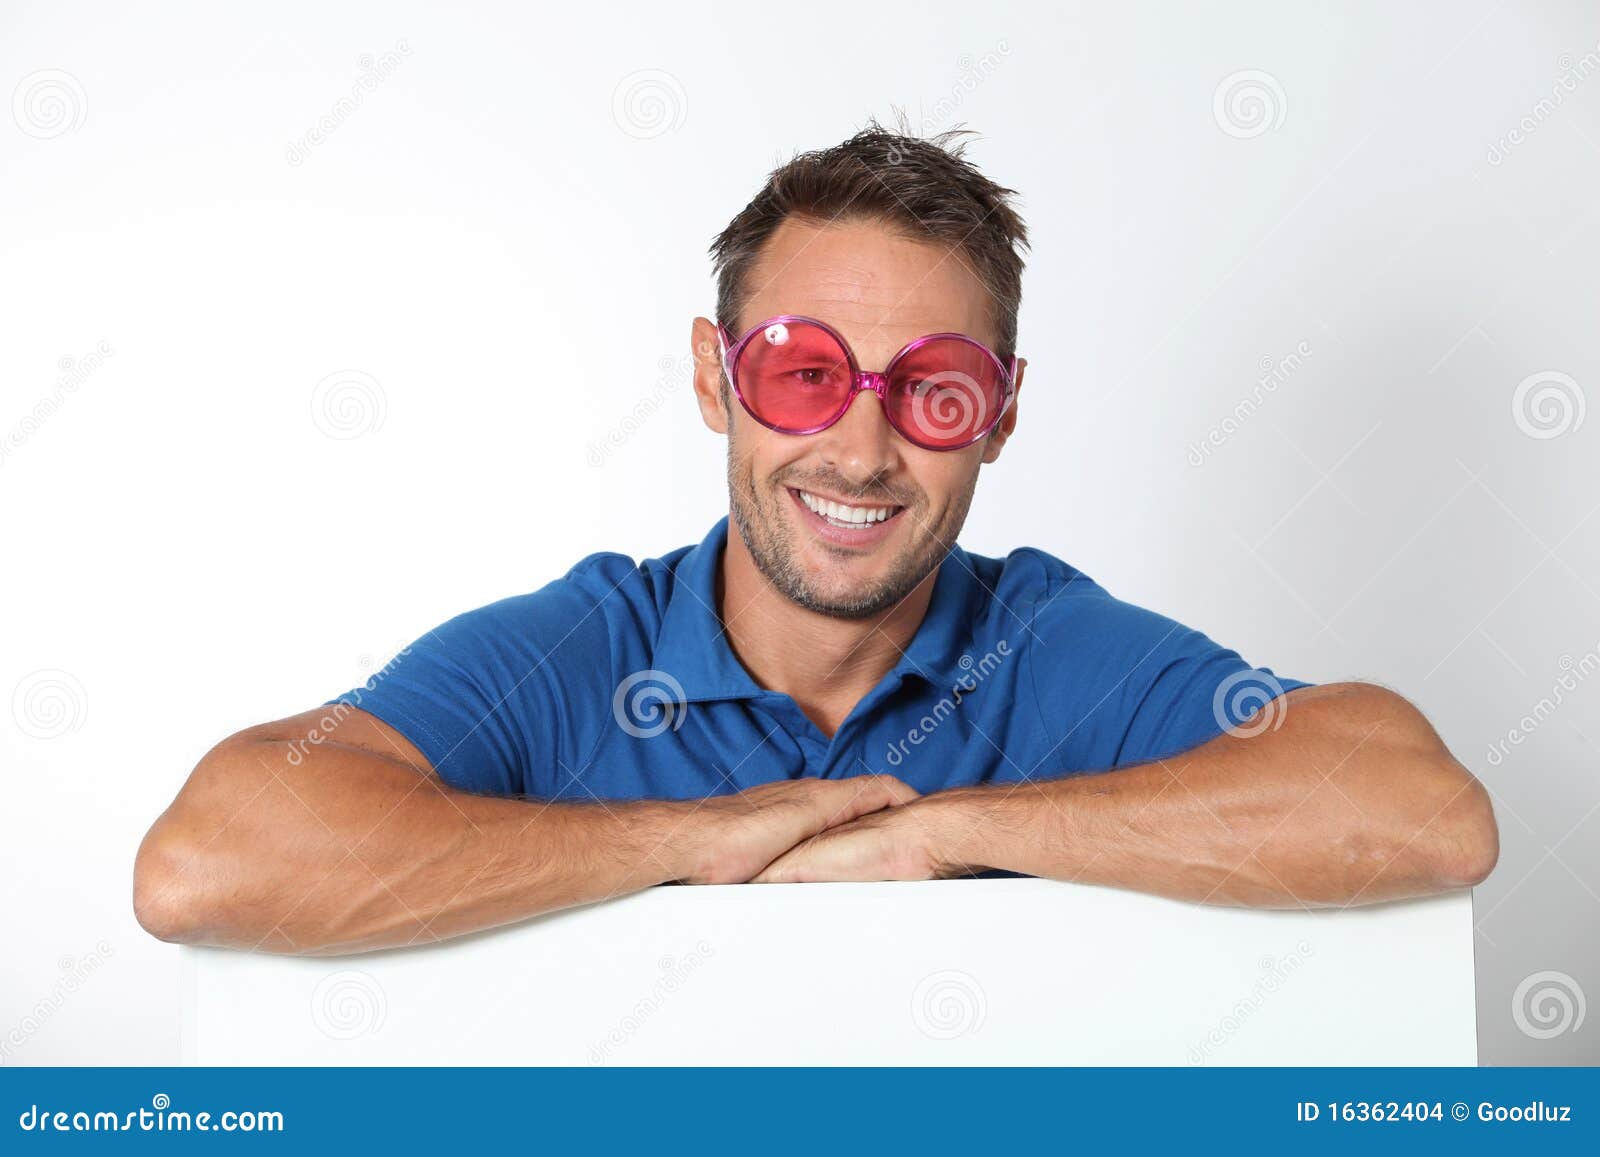 Man with funny sunglasses stock photo. Image of colored - 16362404